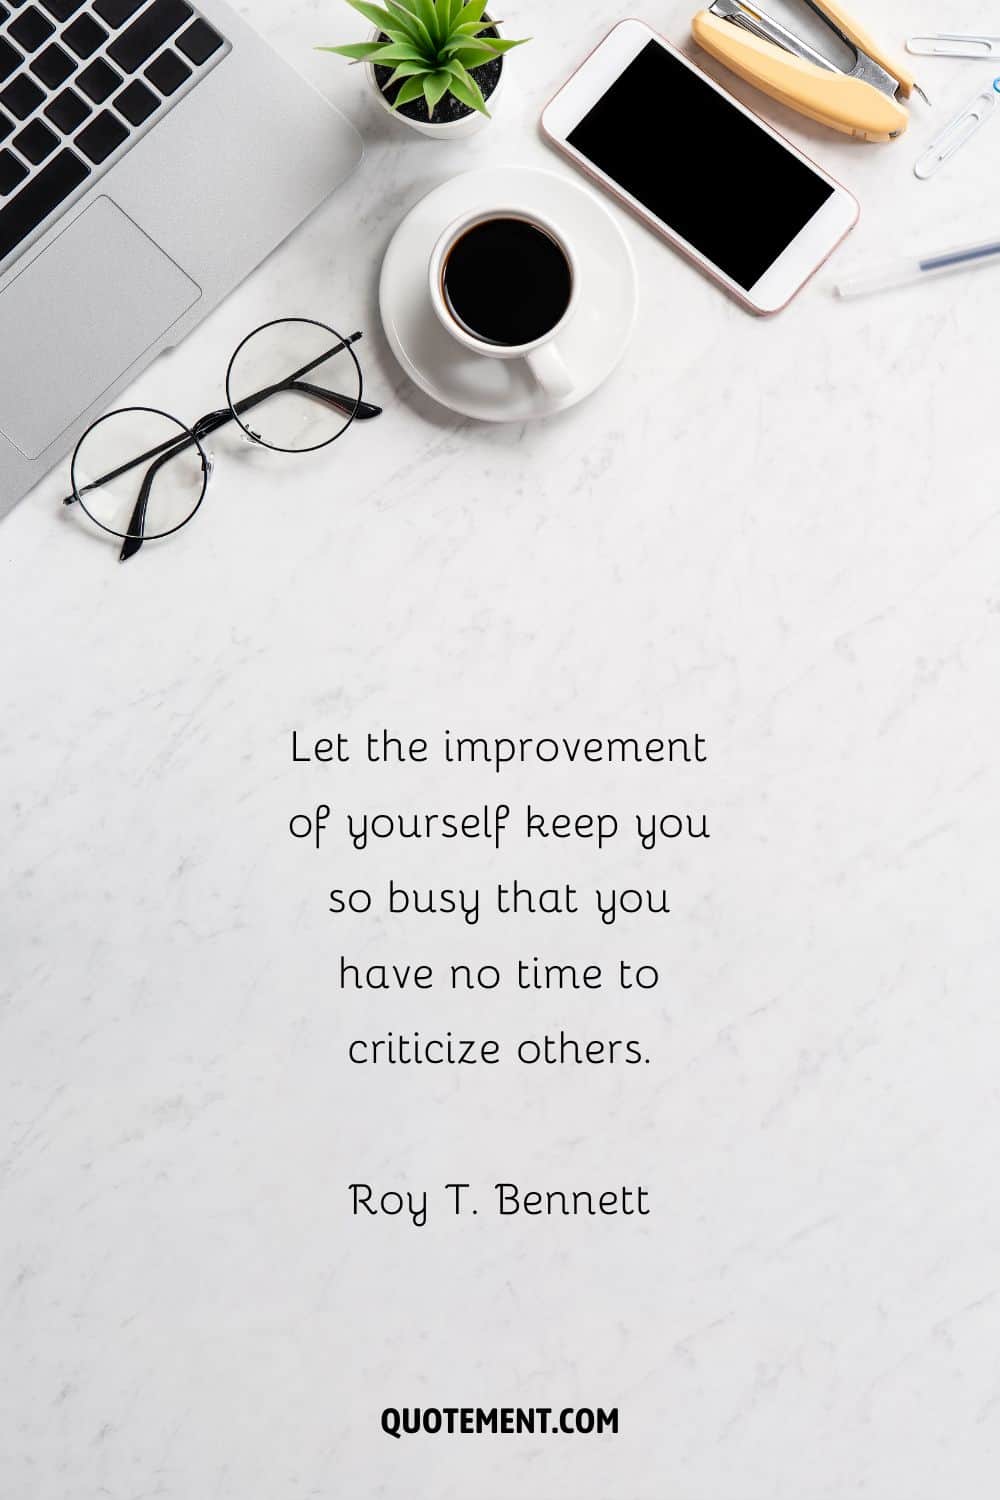 “Let the improvement of yourself keep you so busy that you have no time to criticize others.” — Roy T. Bennett